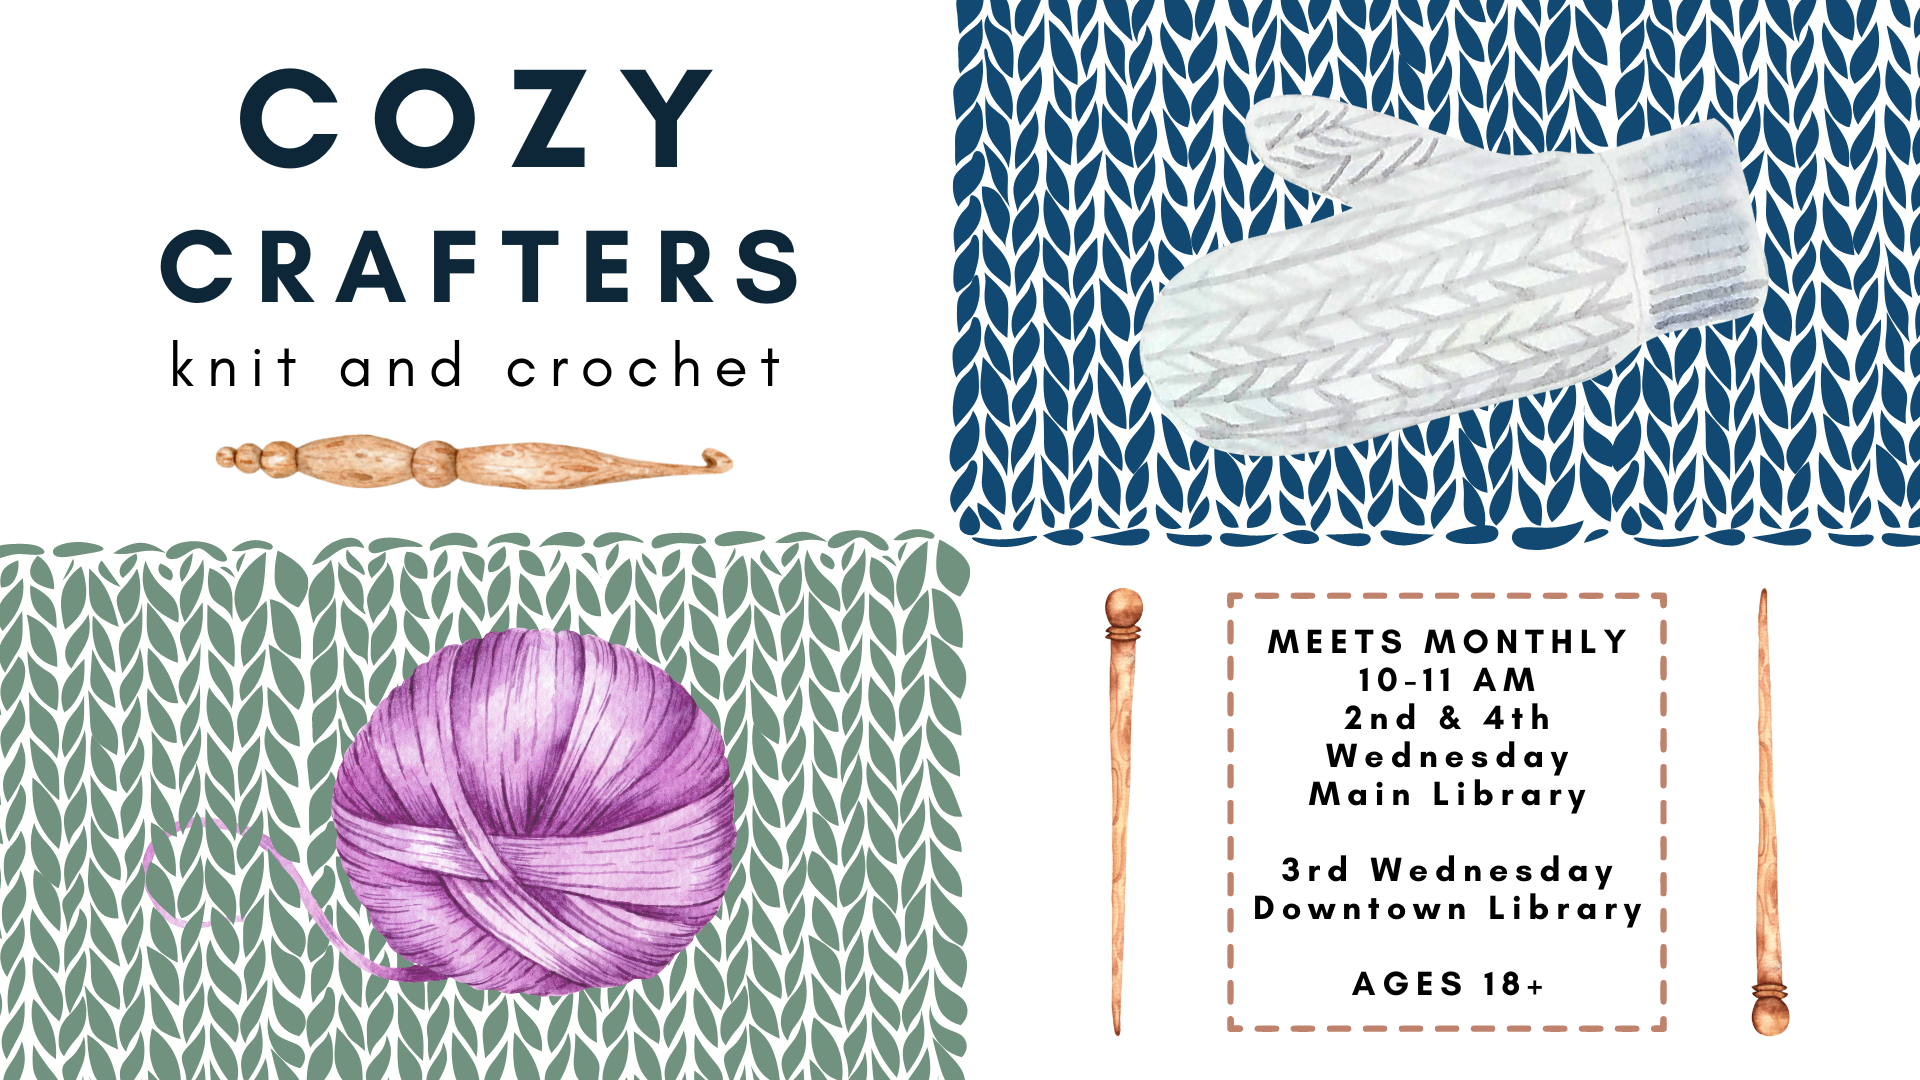 cozy crafters knit and crochet; meets monthly, 10-11 am, 2nd and 4th wednesday main library; 3rd wednesday downtown library; ages 18+